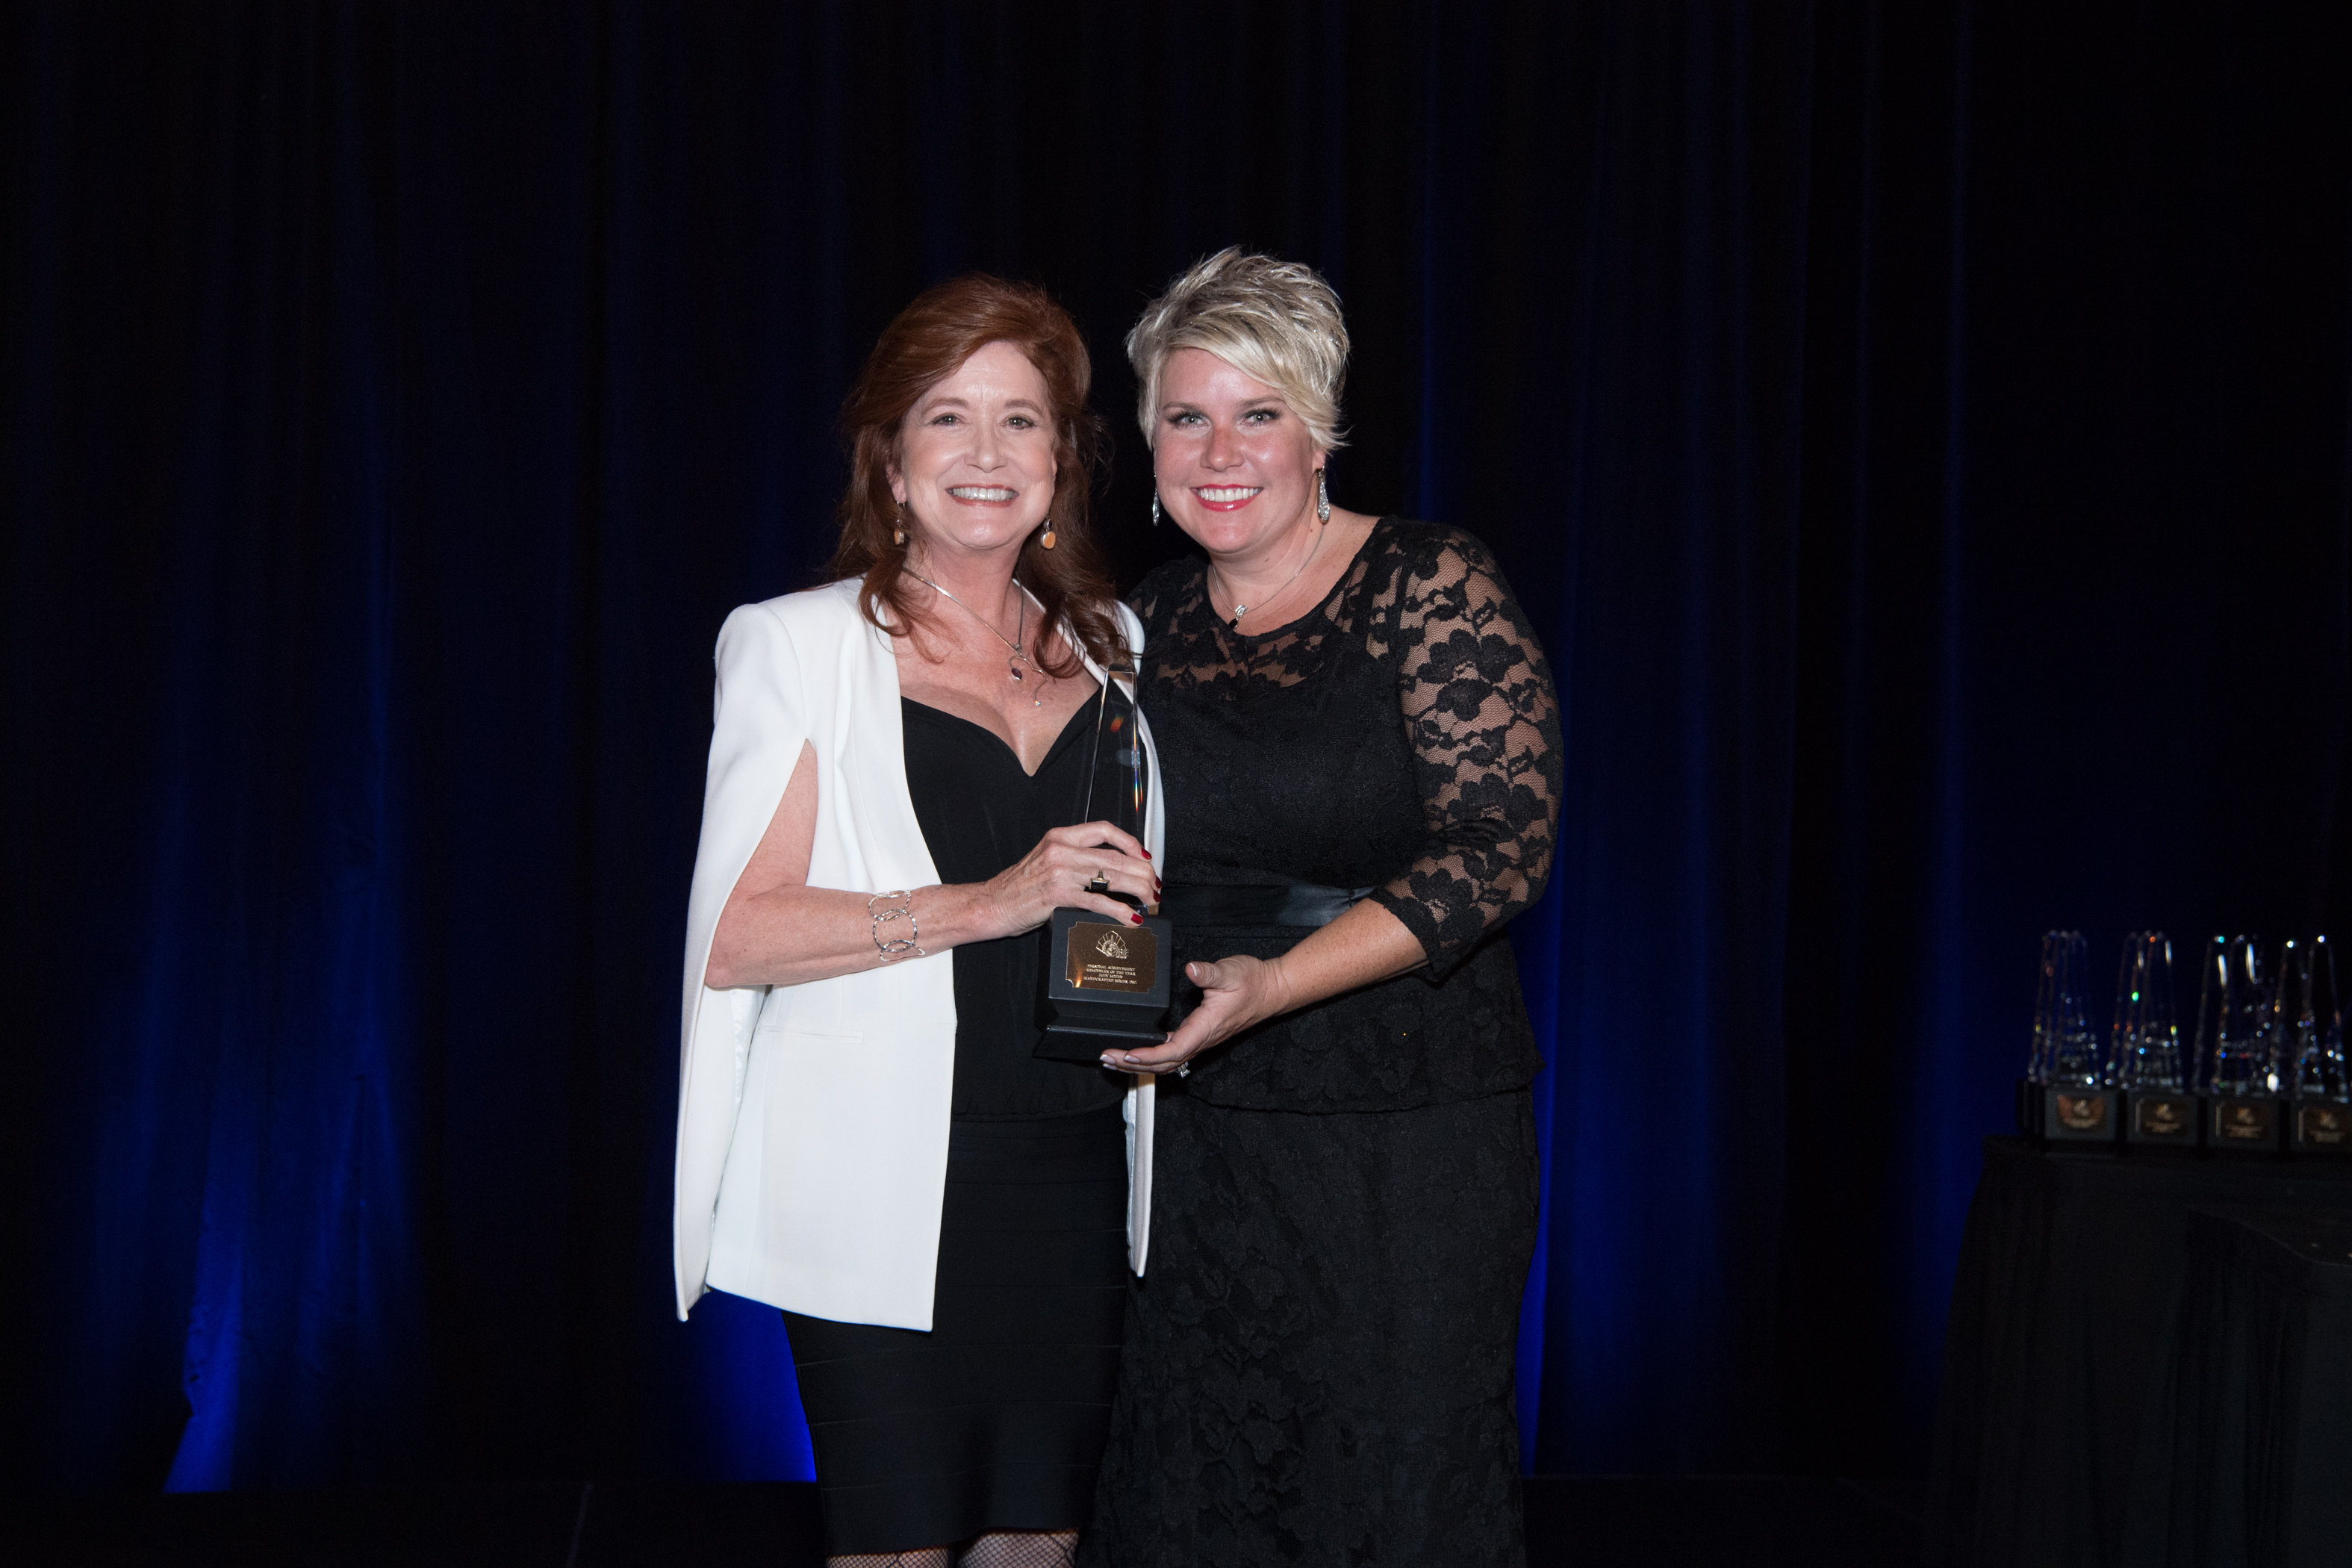 Judy Mozen of Handcrafted Homes, Inc. Wins First-Ever “Remodeler of the Year” OBIE Award